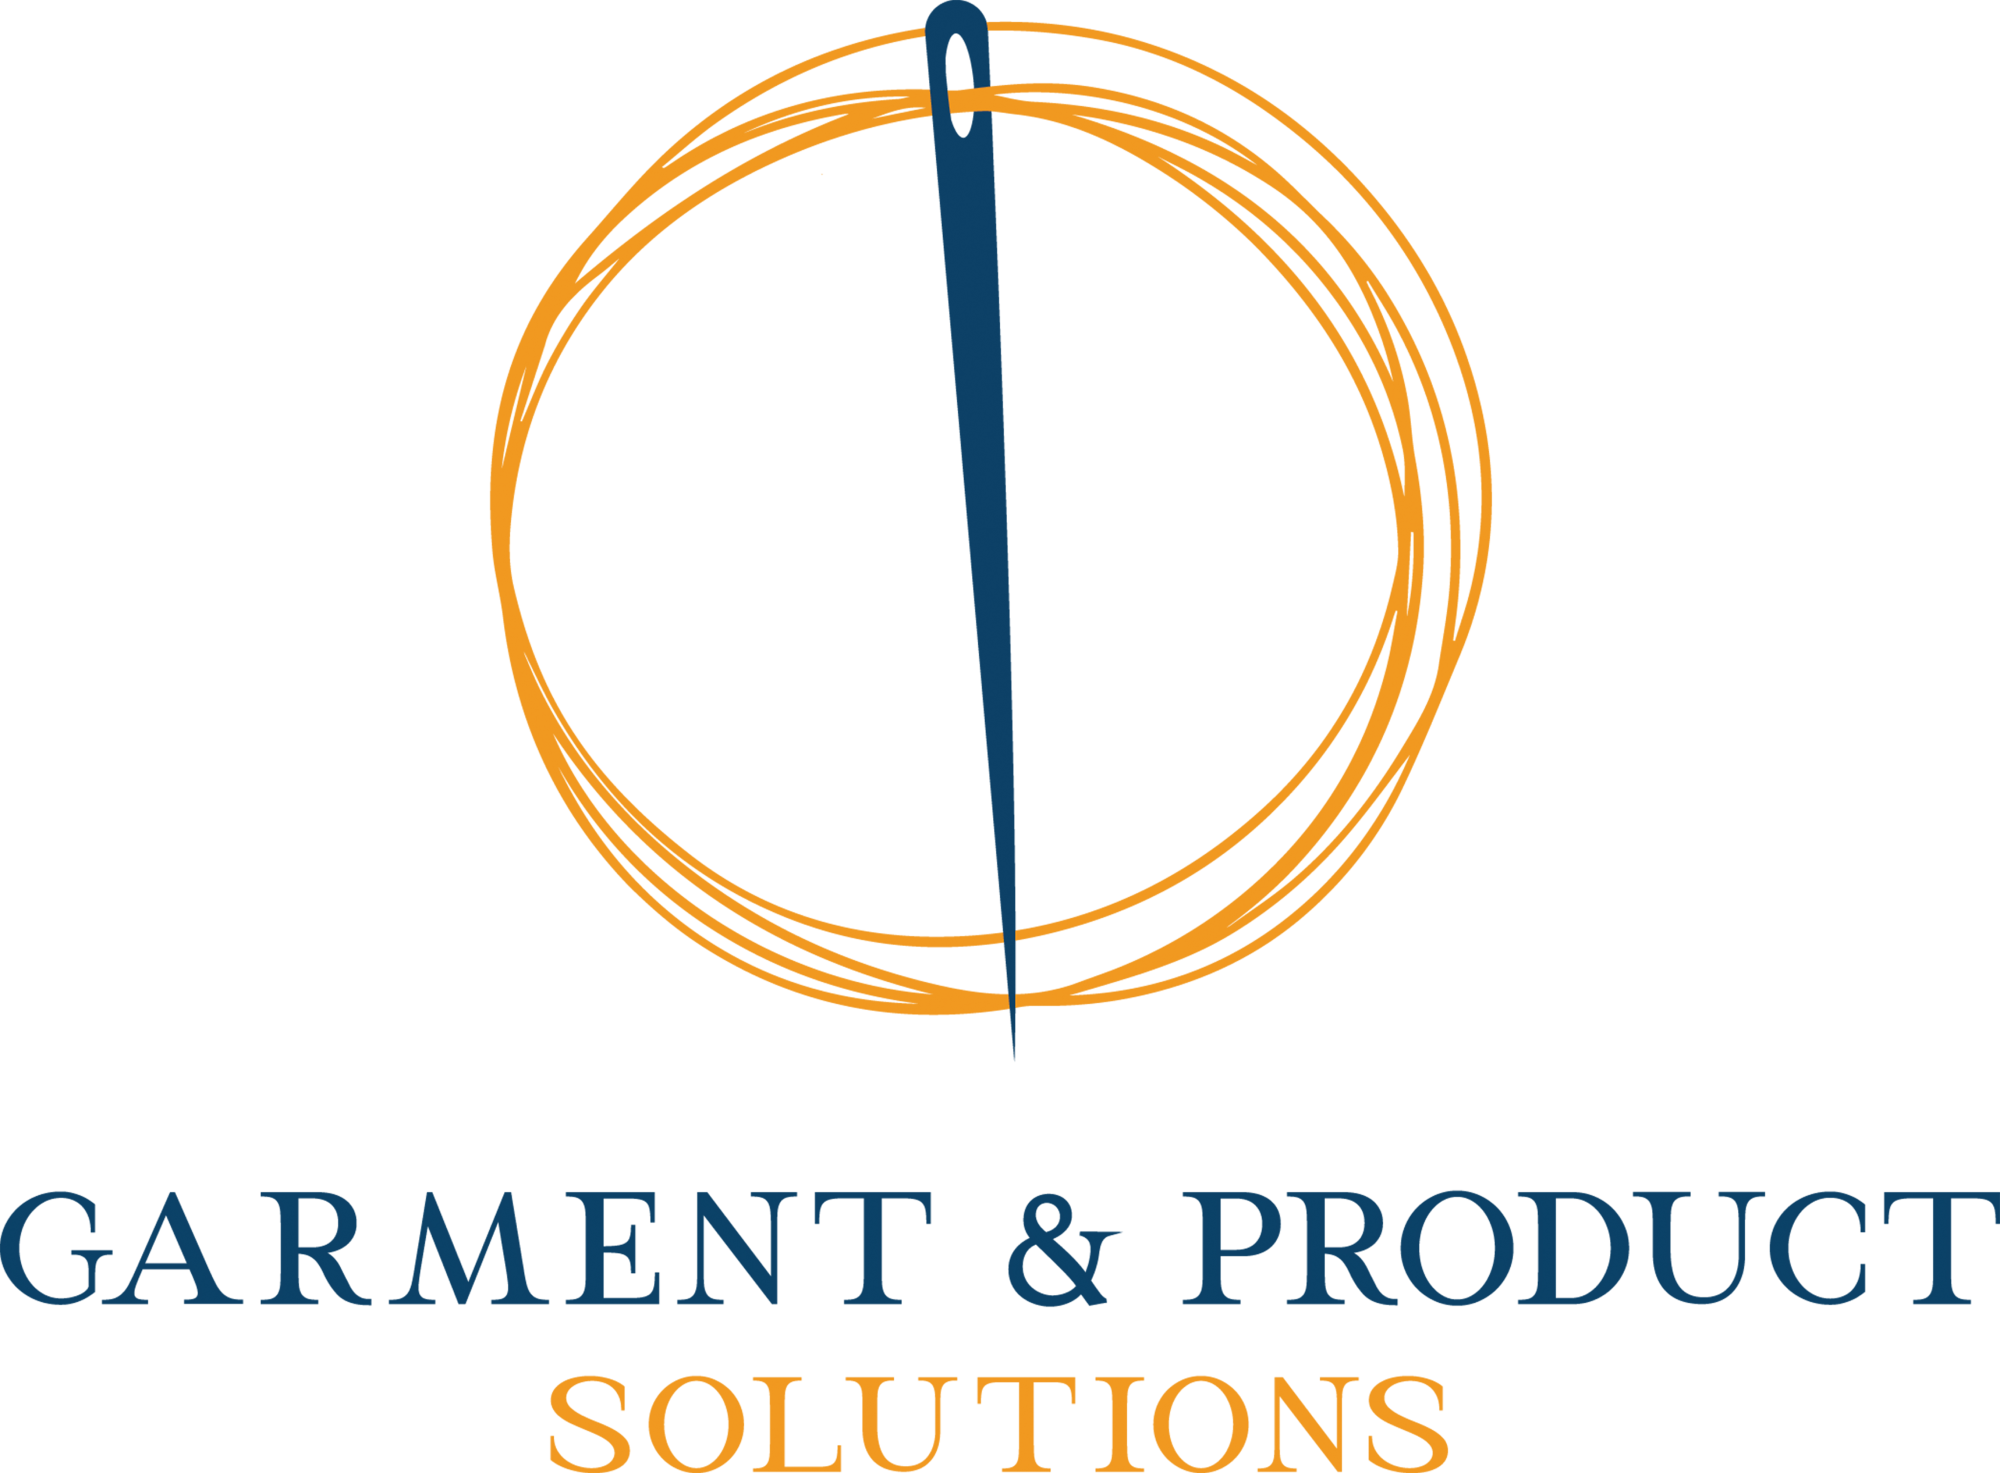 GARMENT AND PRODUCT SOLUTIONS